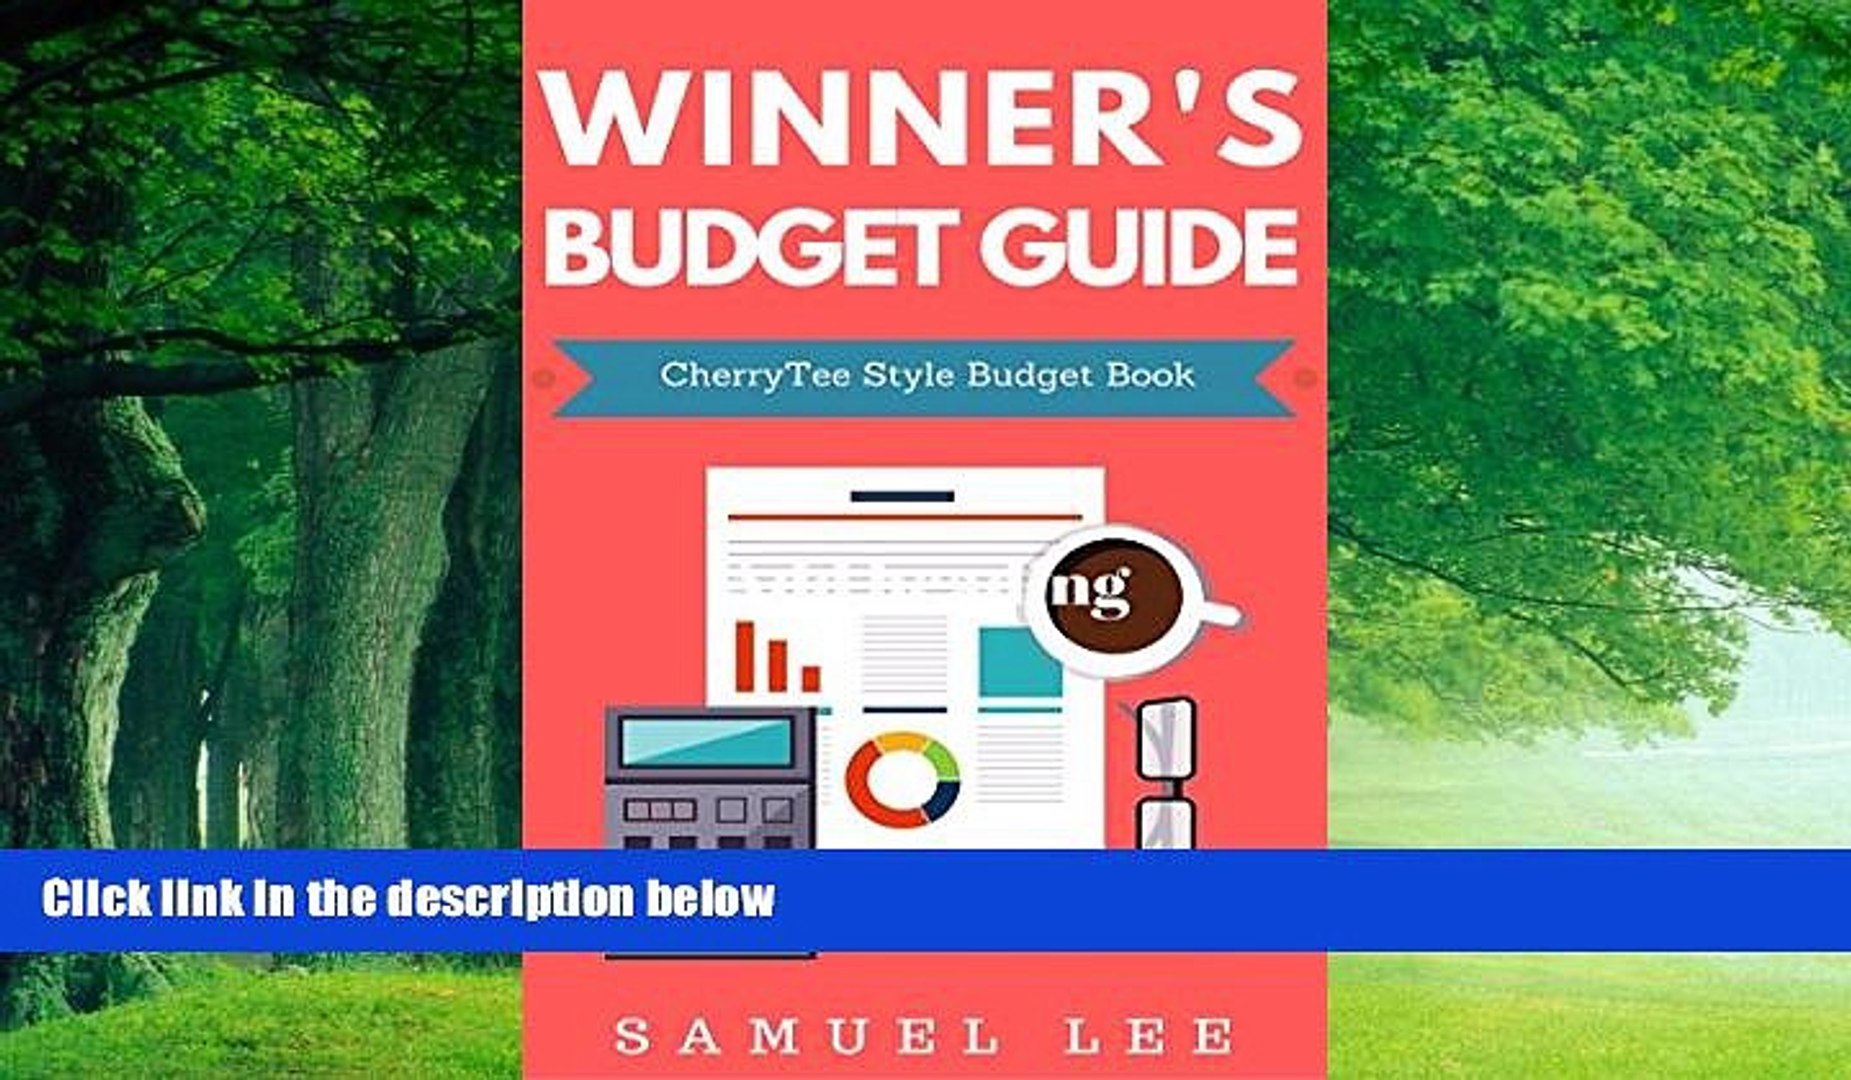 Big Deals  How To Budget: Winner s Budget Guide CherryTree Style(how to budget money,budgeting